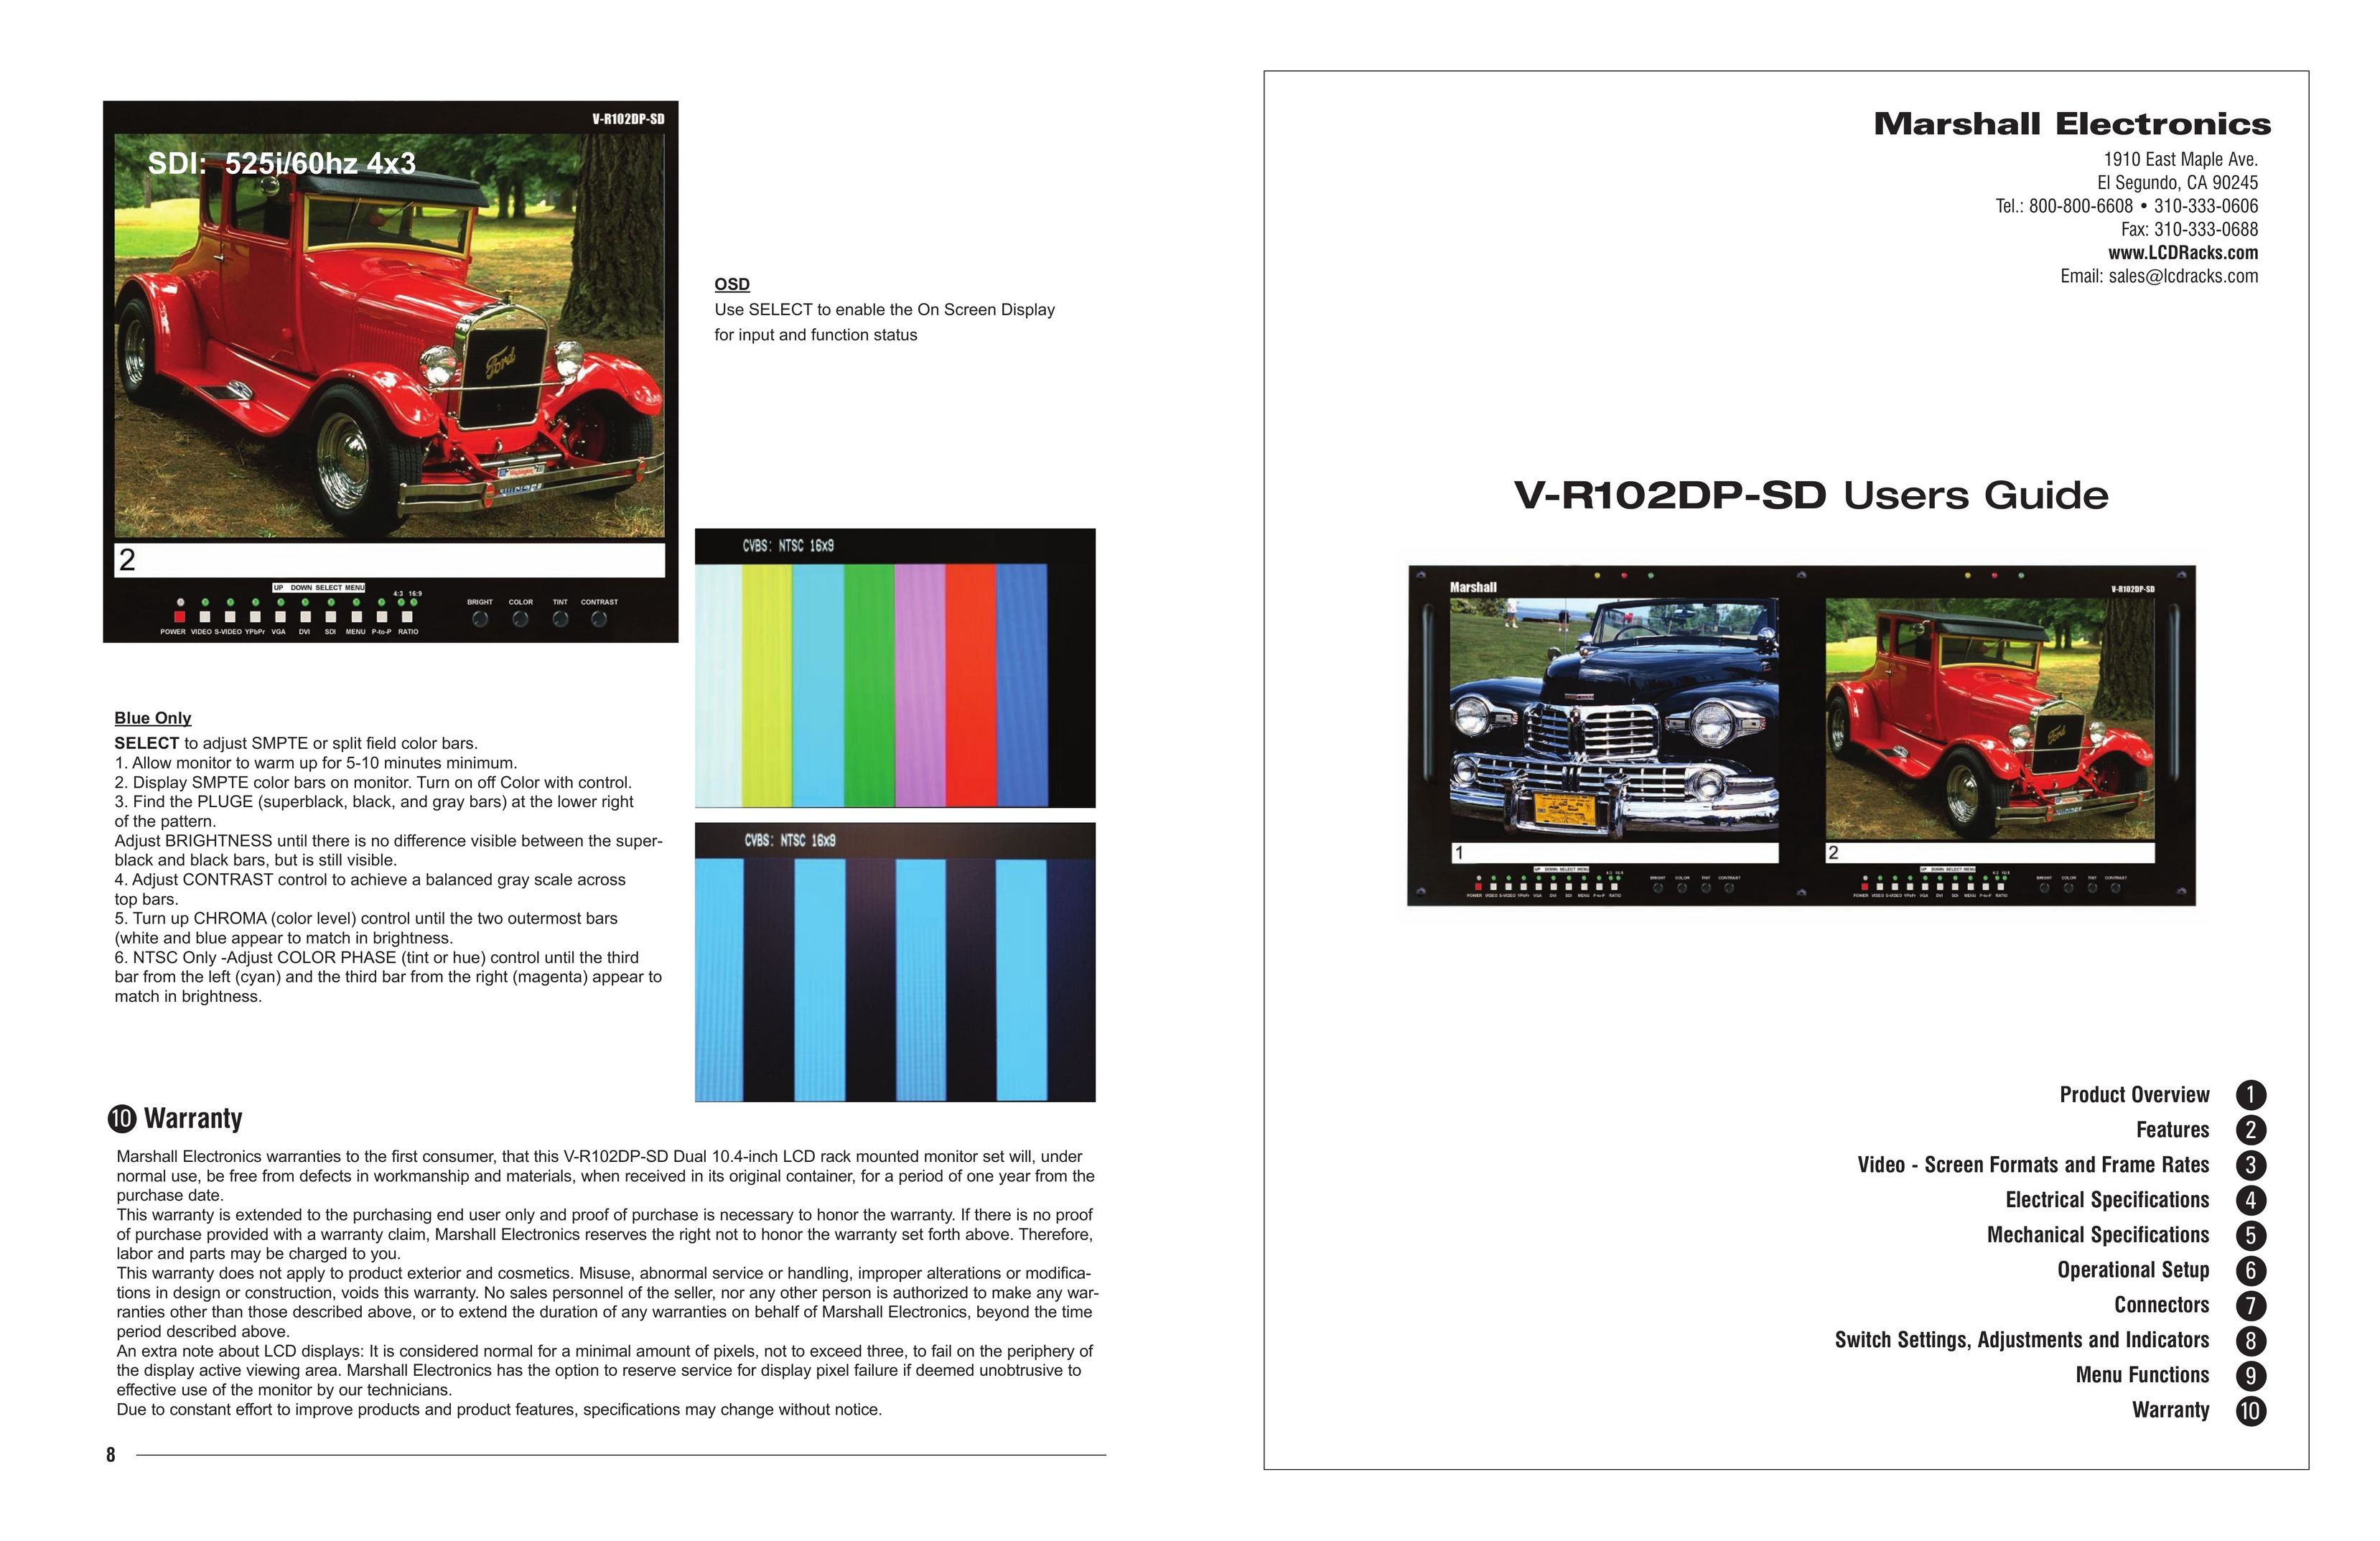 Marshall electronic V-R102DP-SD Flat Panel Television User Manual